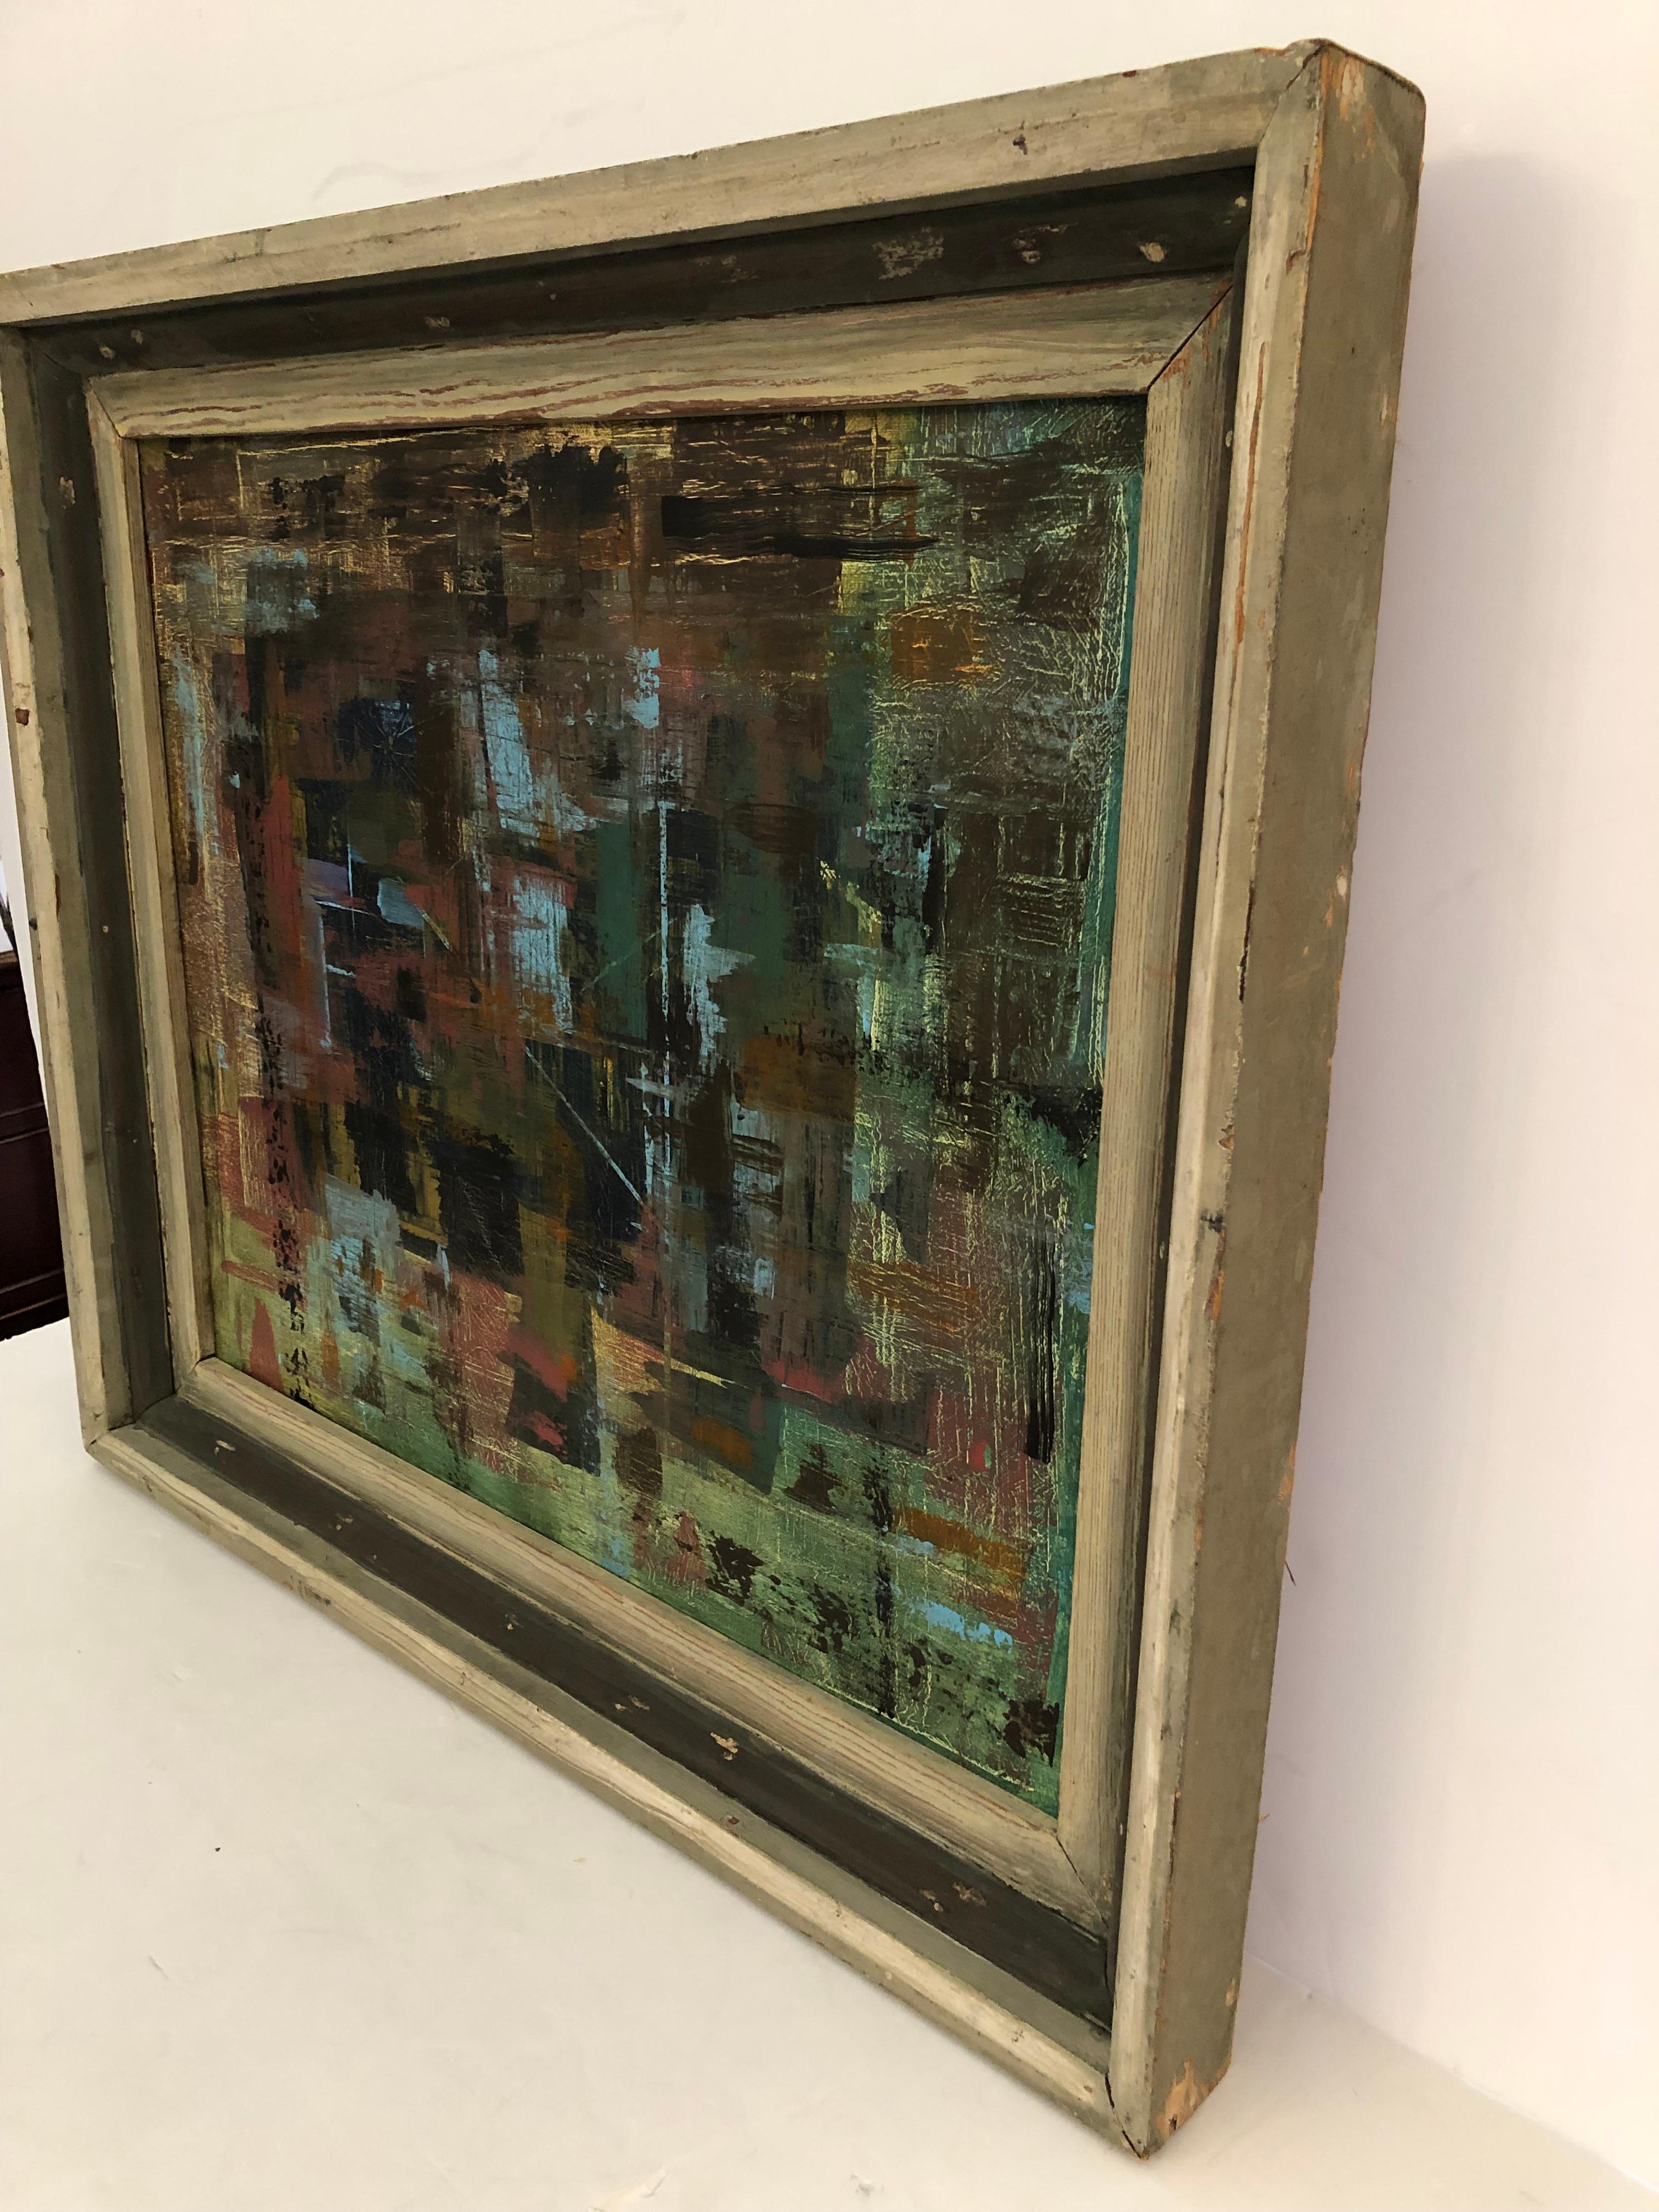 Beautifully rendered abstract painting having textural layered surface and rich color palette of navy, green, burnt orange and turquoise. Signed on the back but illlegible. Wonderful vintage painted wooden frame with a rugged rustic feel.
Canvas